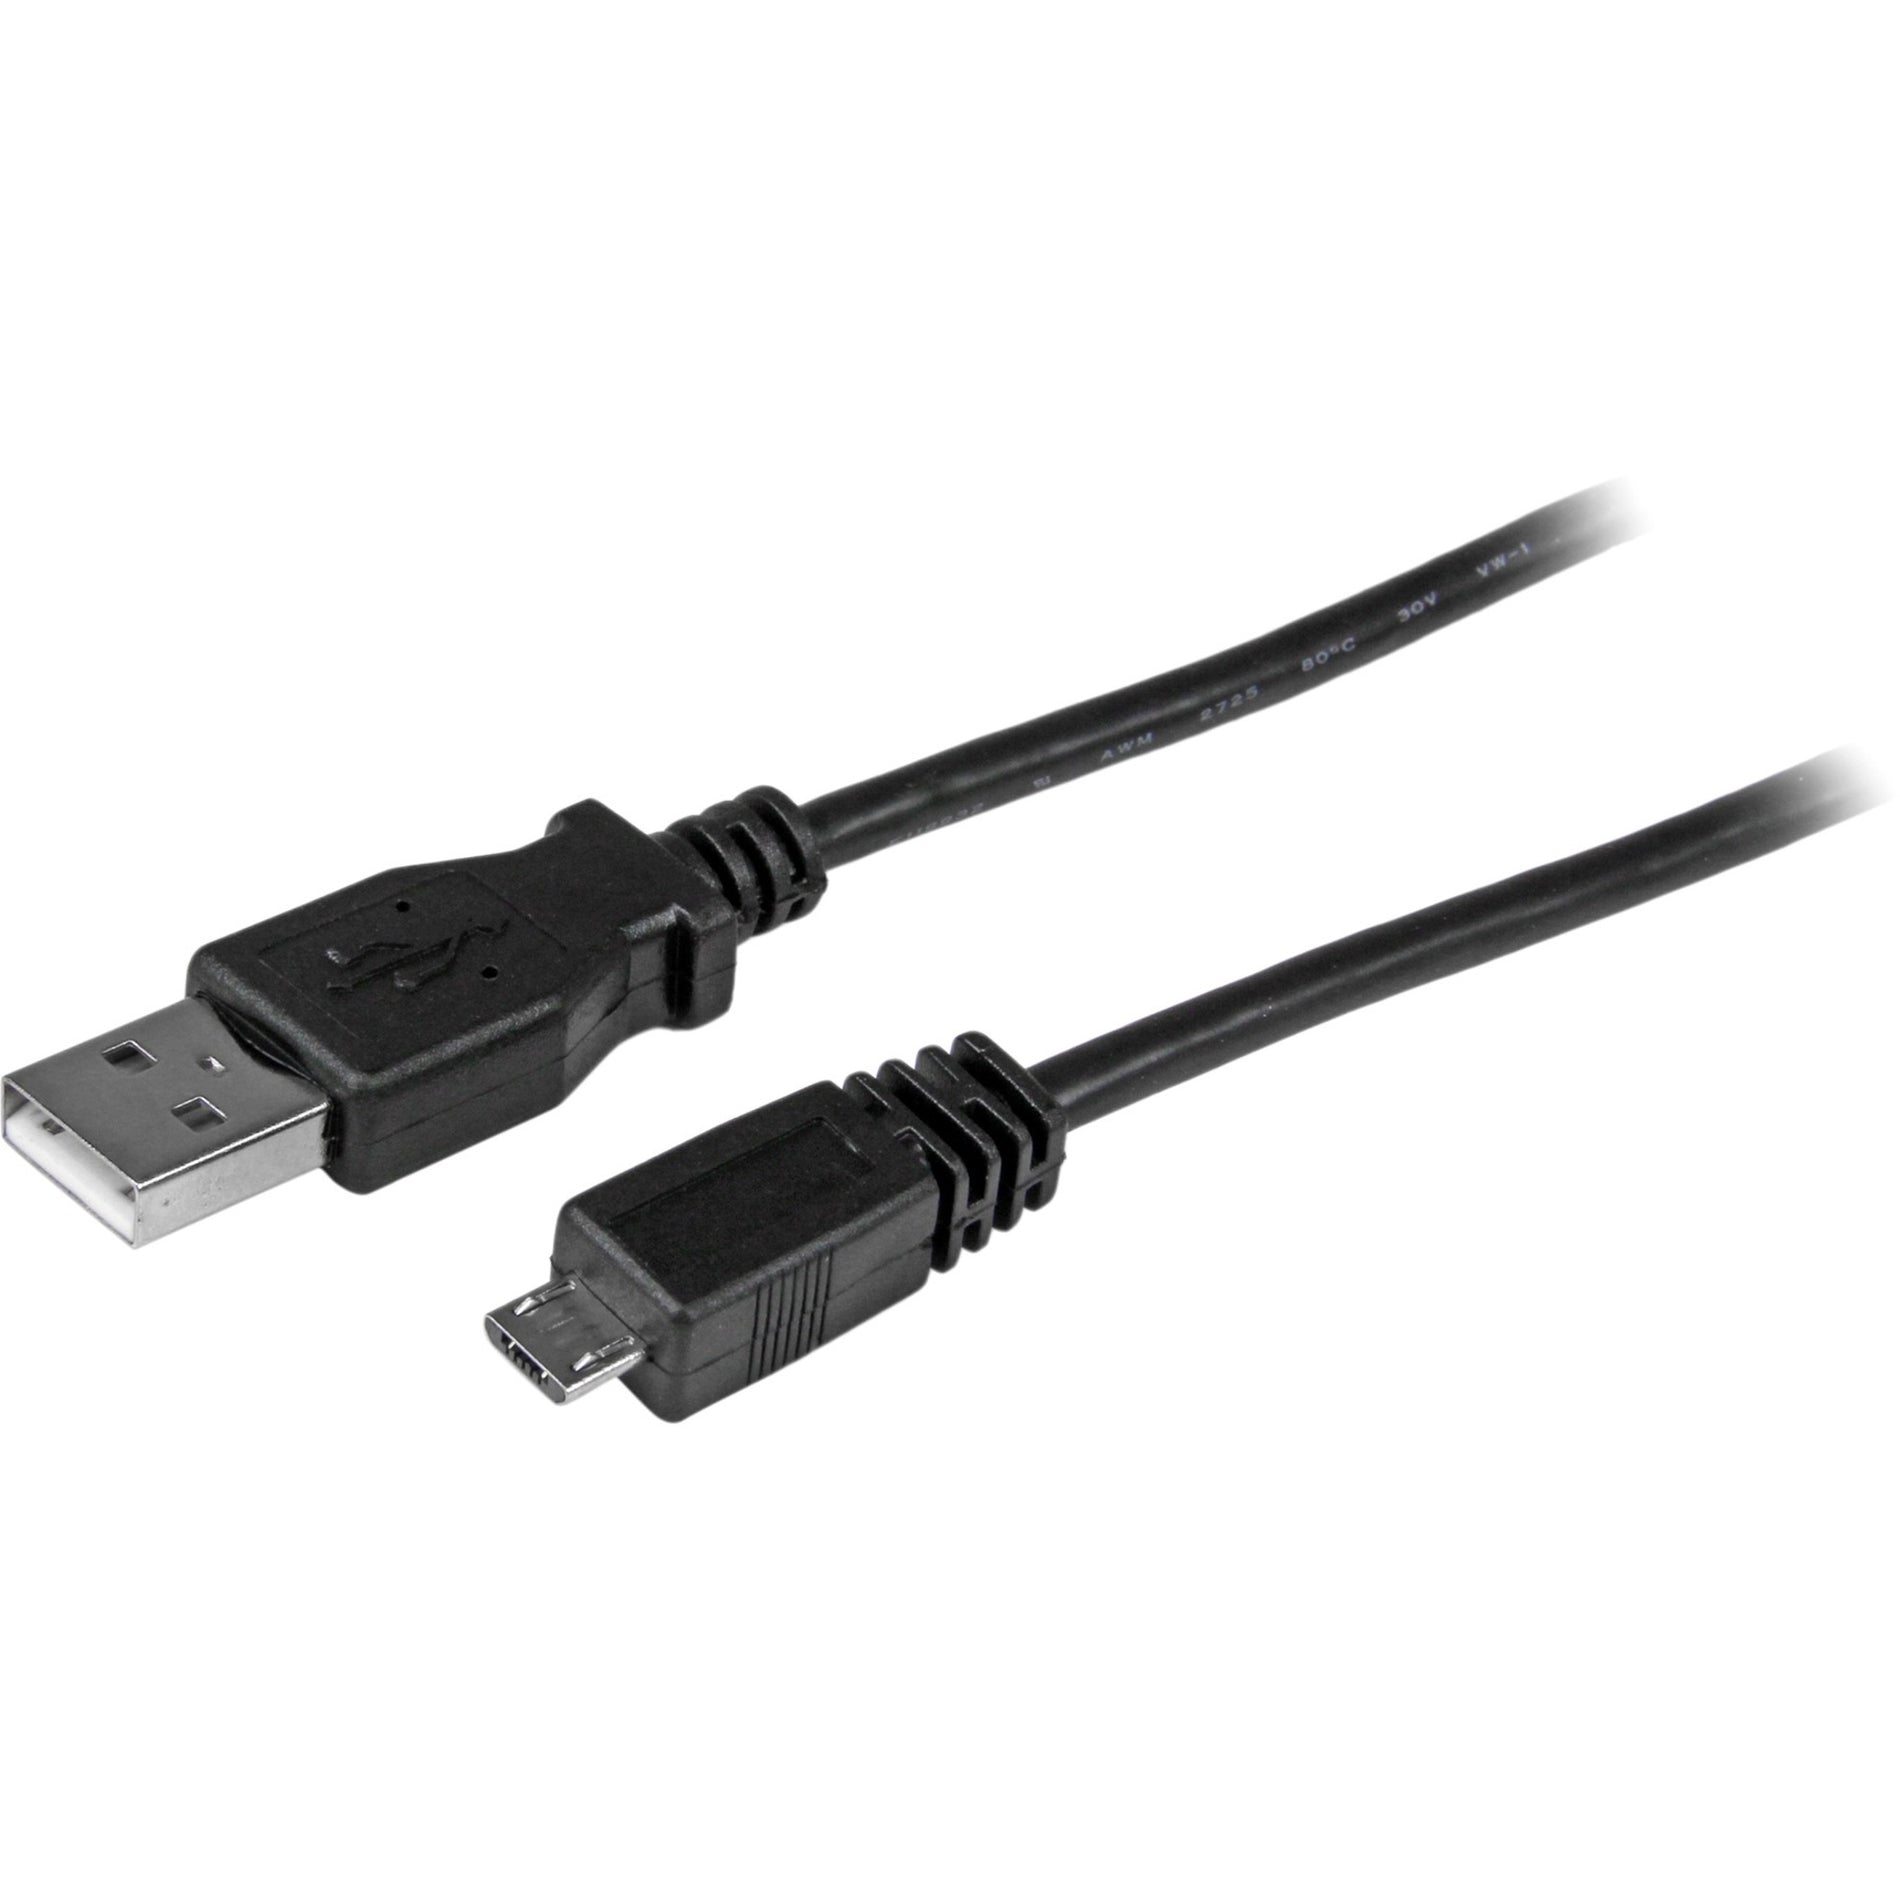 StarTech.com UUSBHAUB6 Micro USB Cable, 6ft Data Transfer Cable, Copper Conductor, USB 2.0 Type A - Male to Micro USB 2.0 Type B - Male, Black